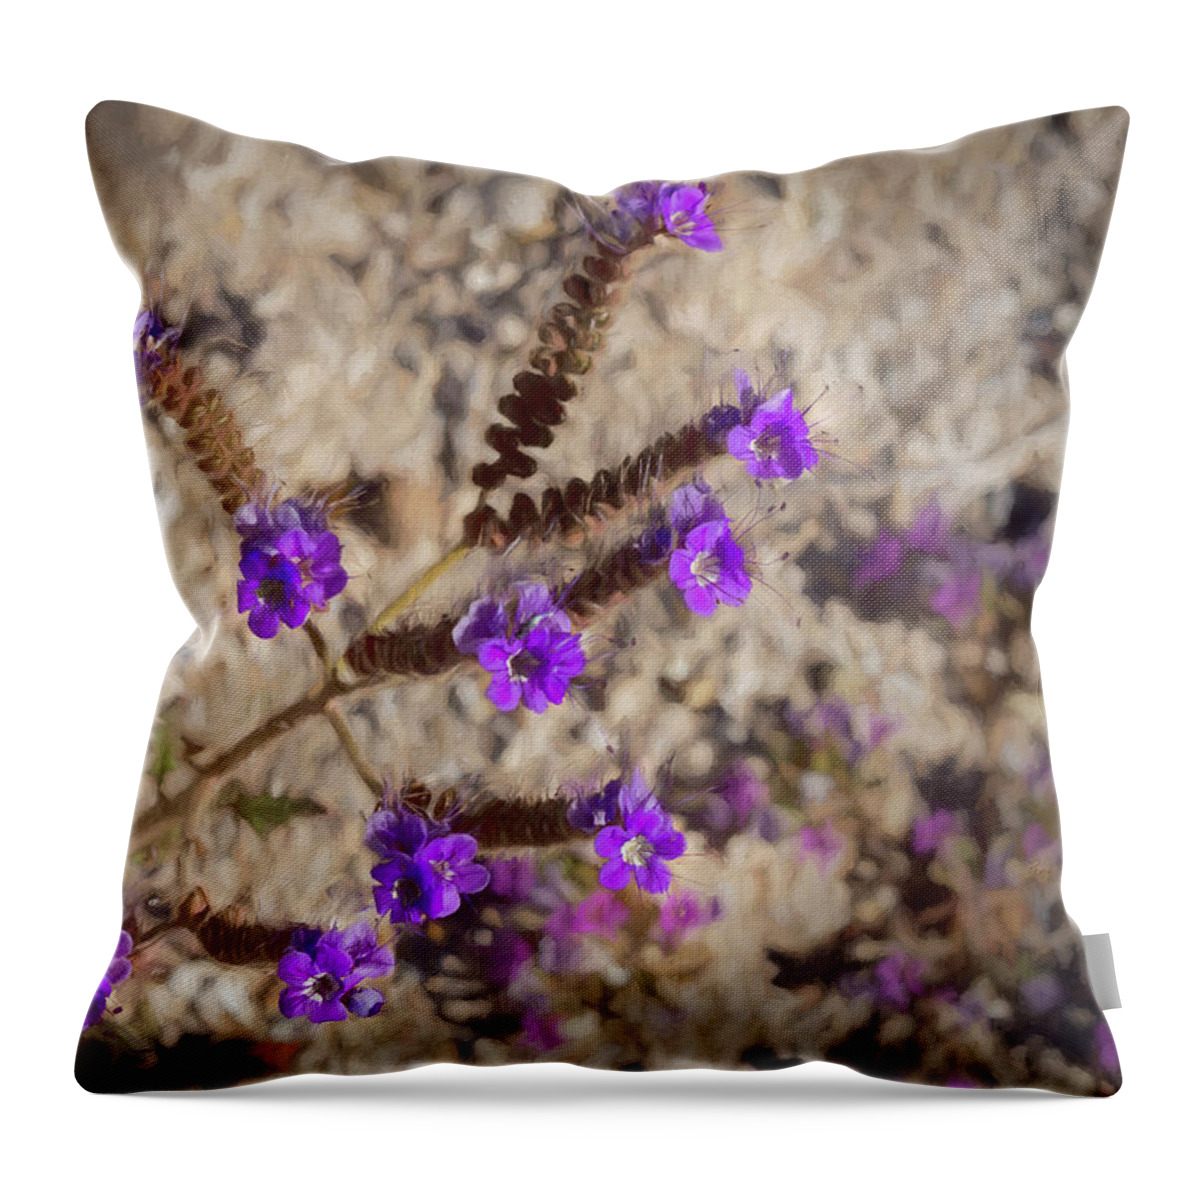 Background Throw Pillow featuring the photograph Desert Zig Zag Purple Flower by Penny Lisowski